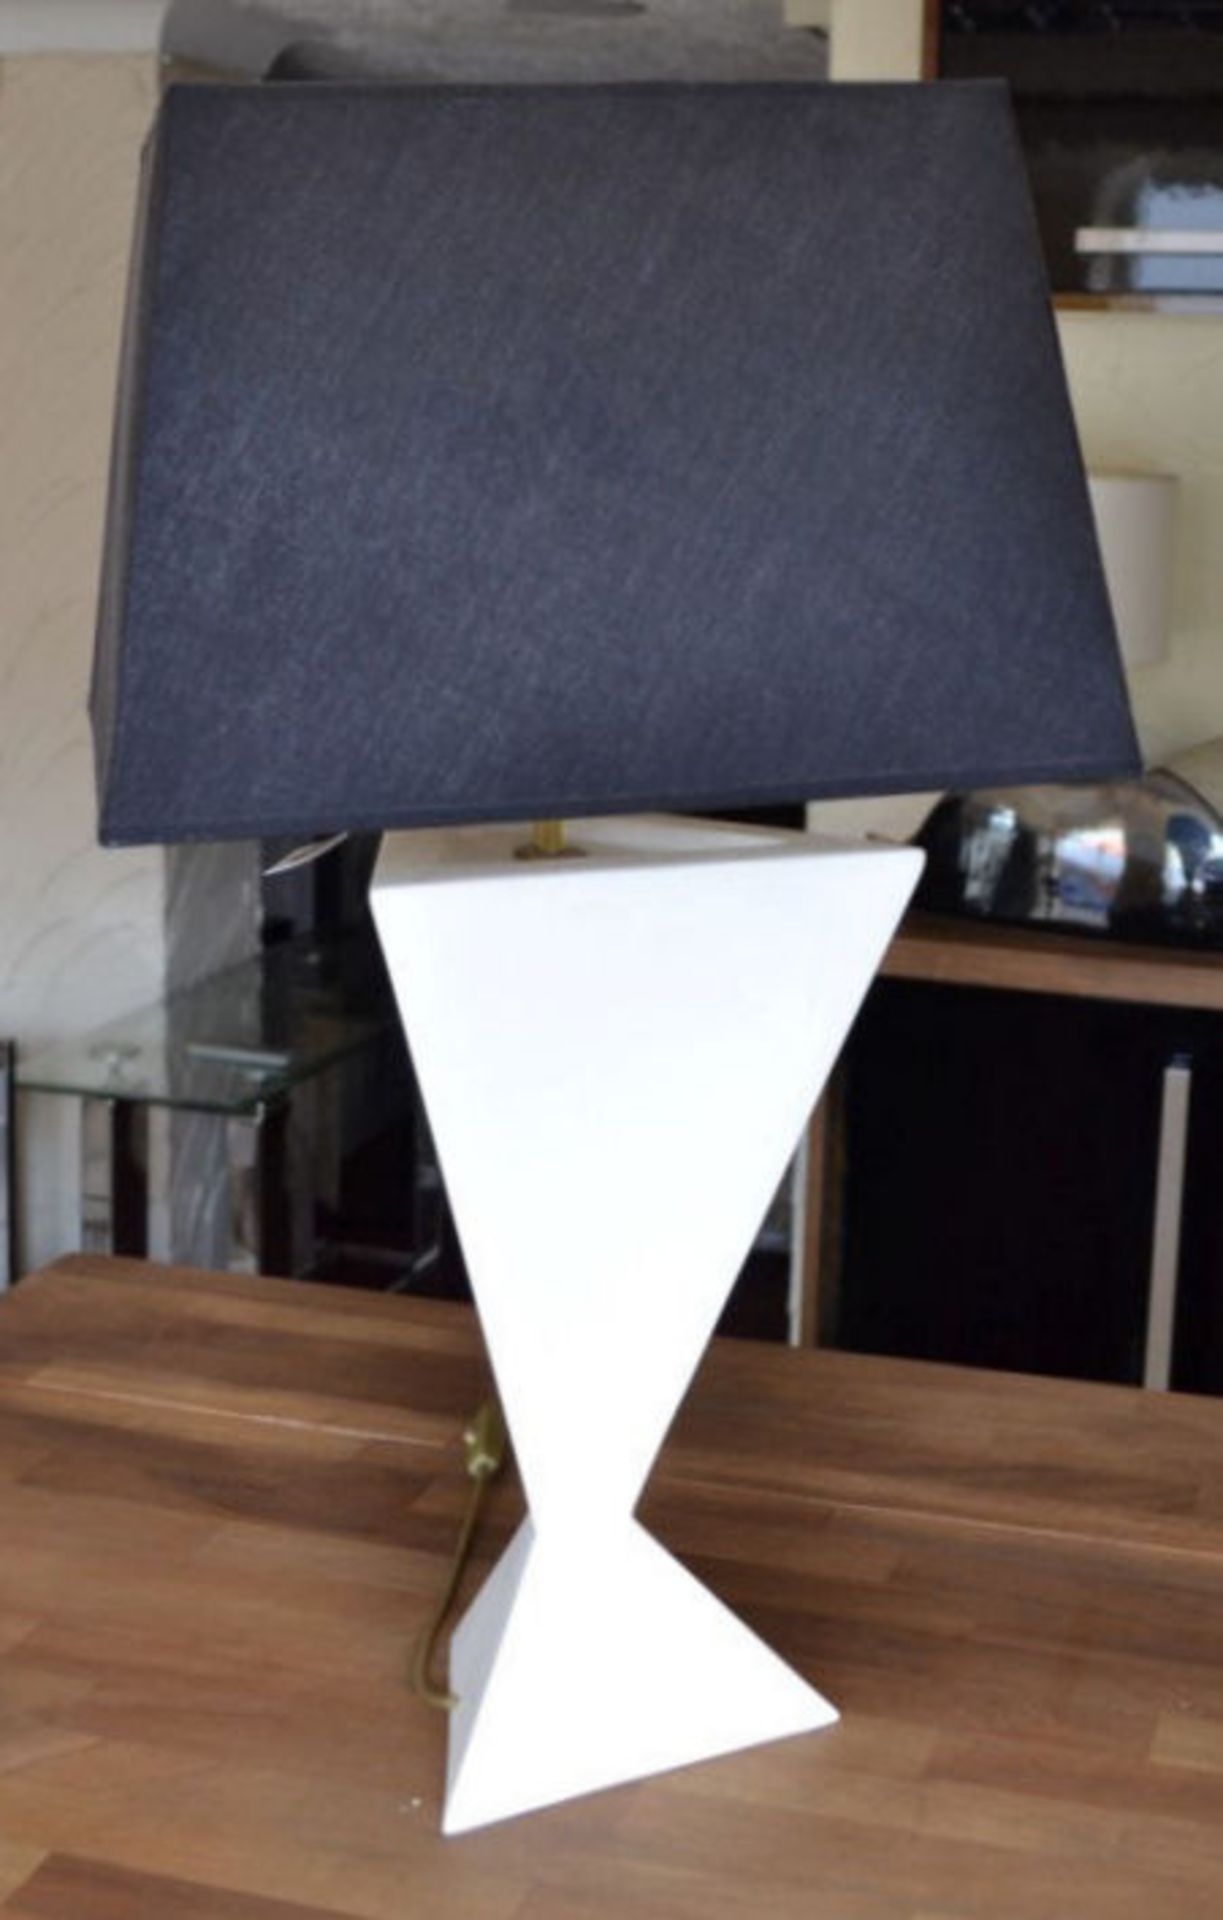 1 x Contemporary White Geometric Table Lamp - Image 2 of 4